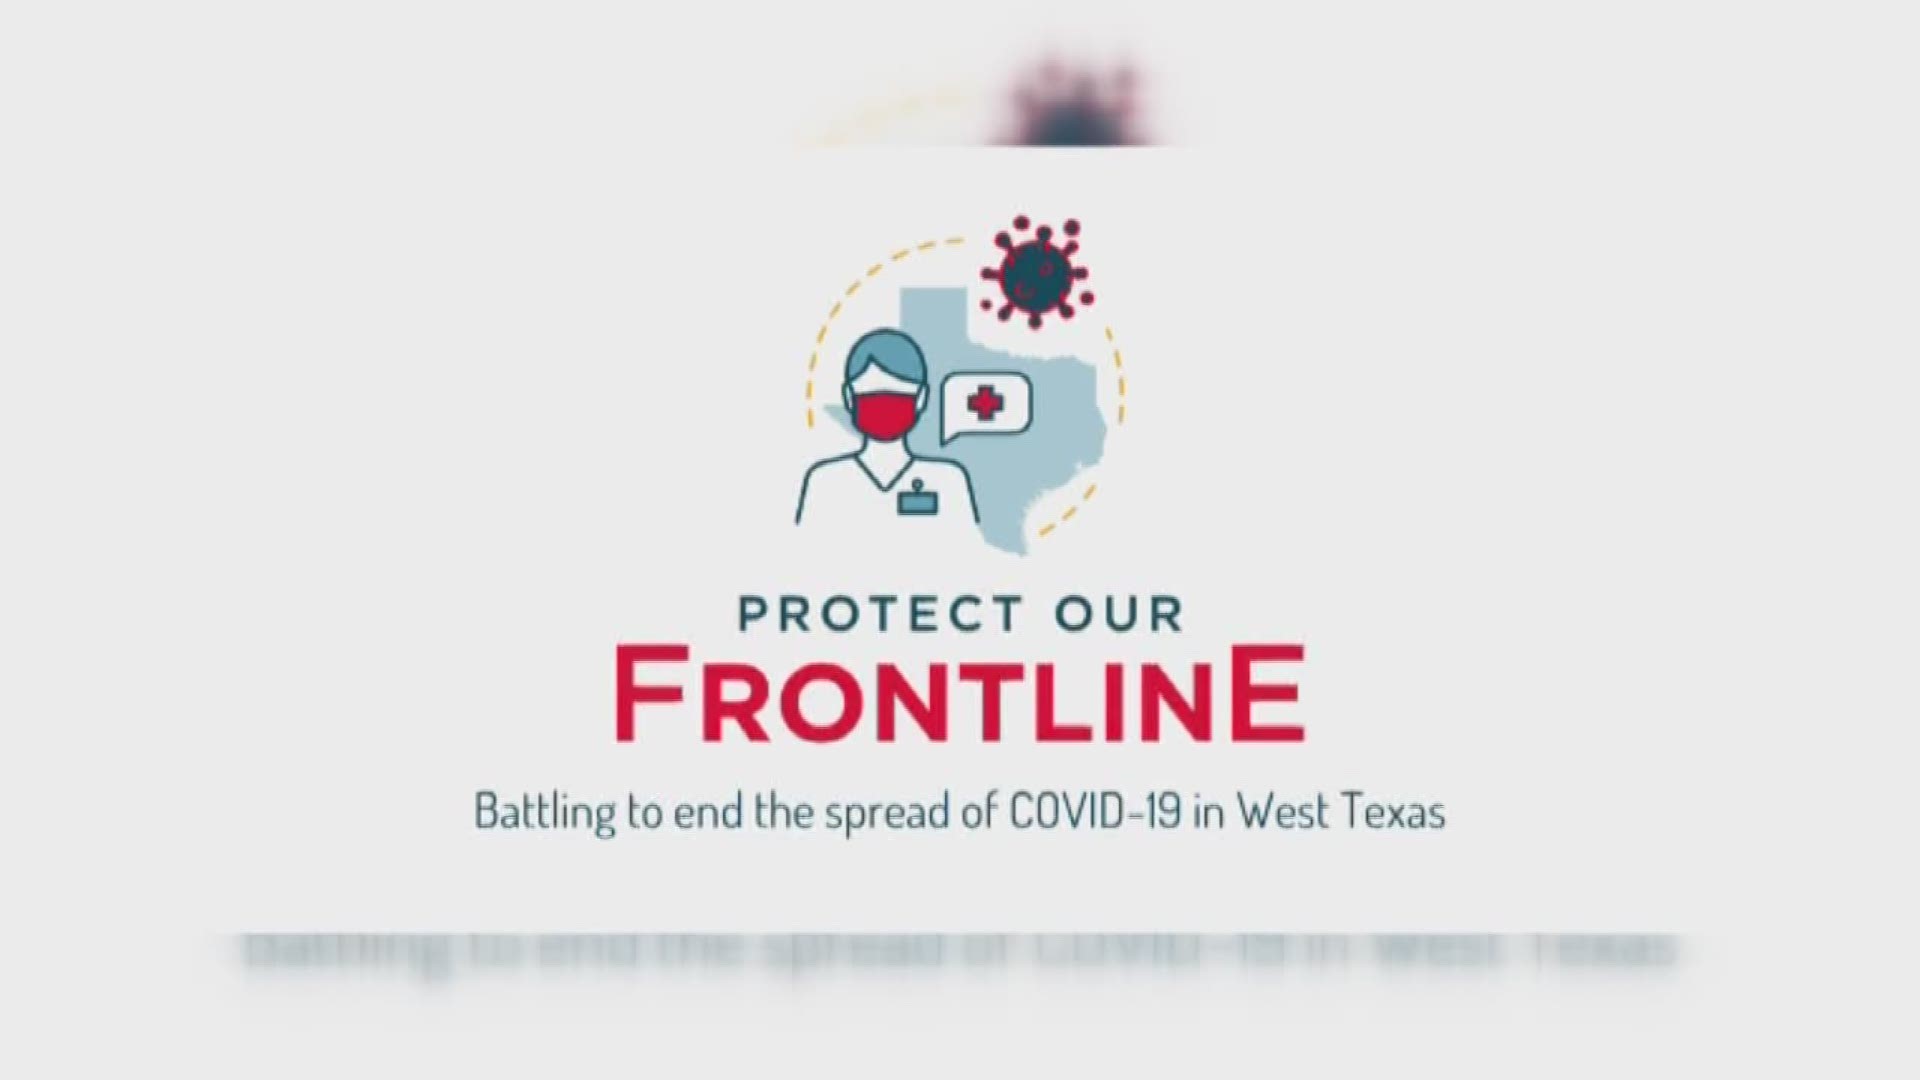 A new local group called Protect Our Frontline that aims to bring medical professionals together during these trying times.